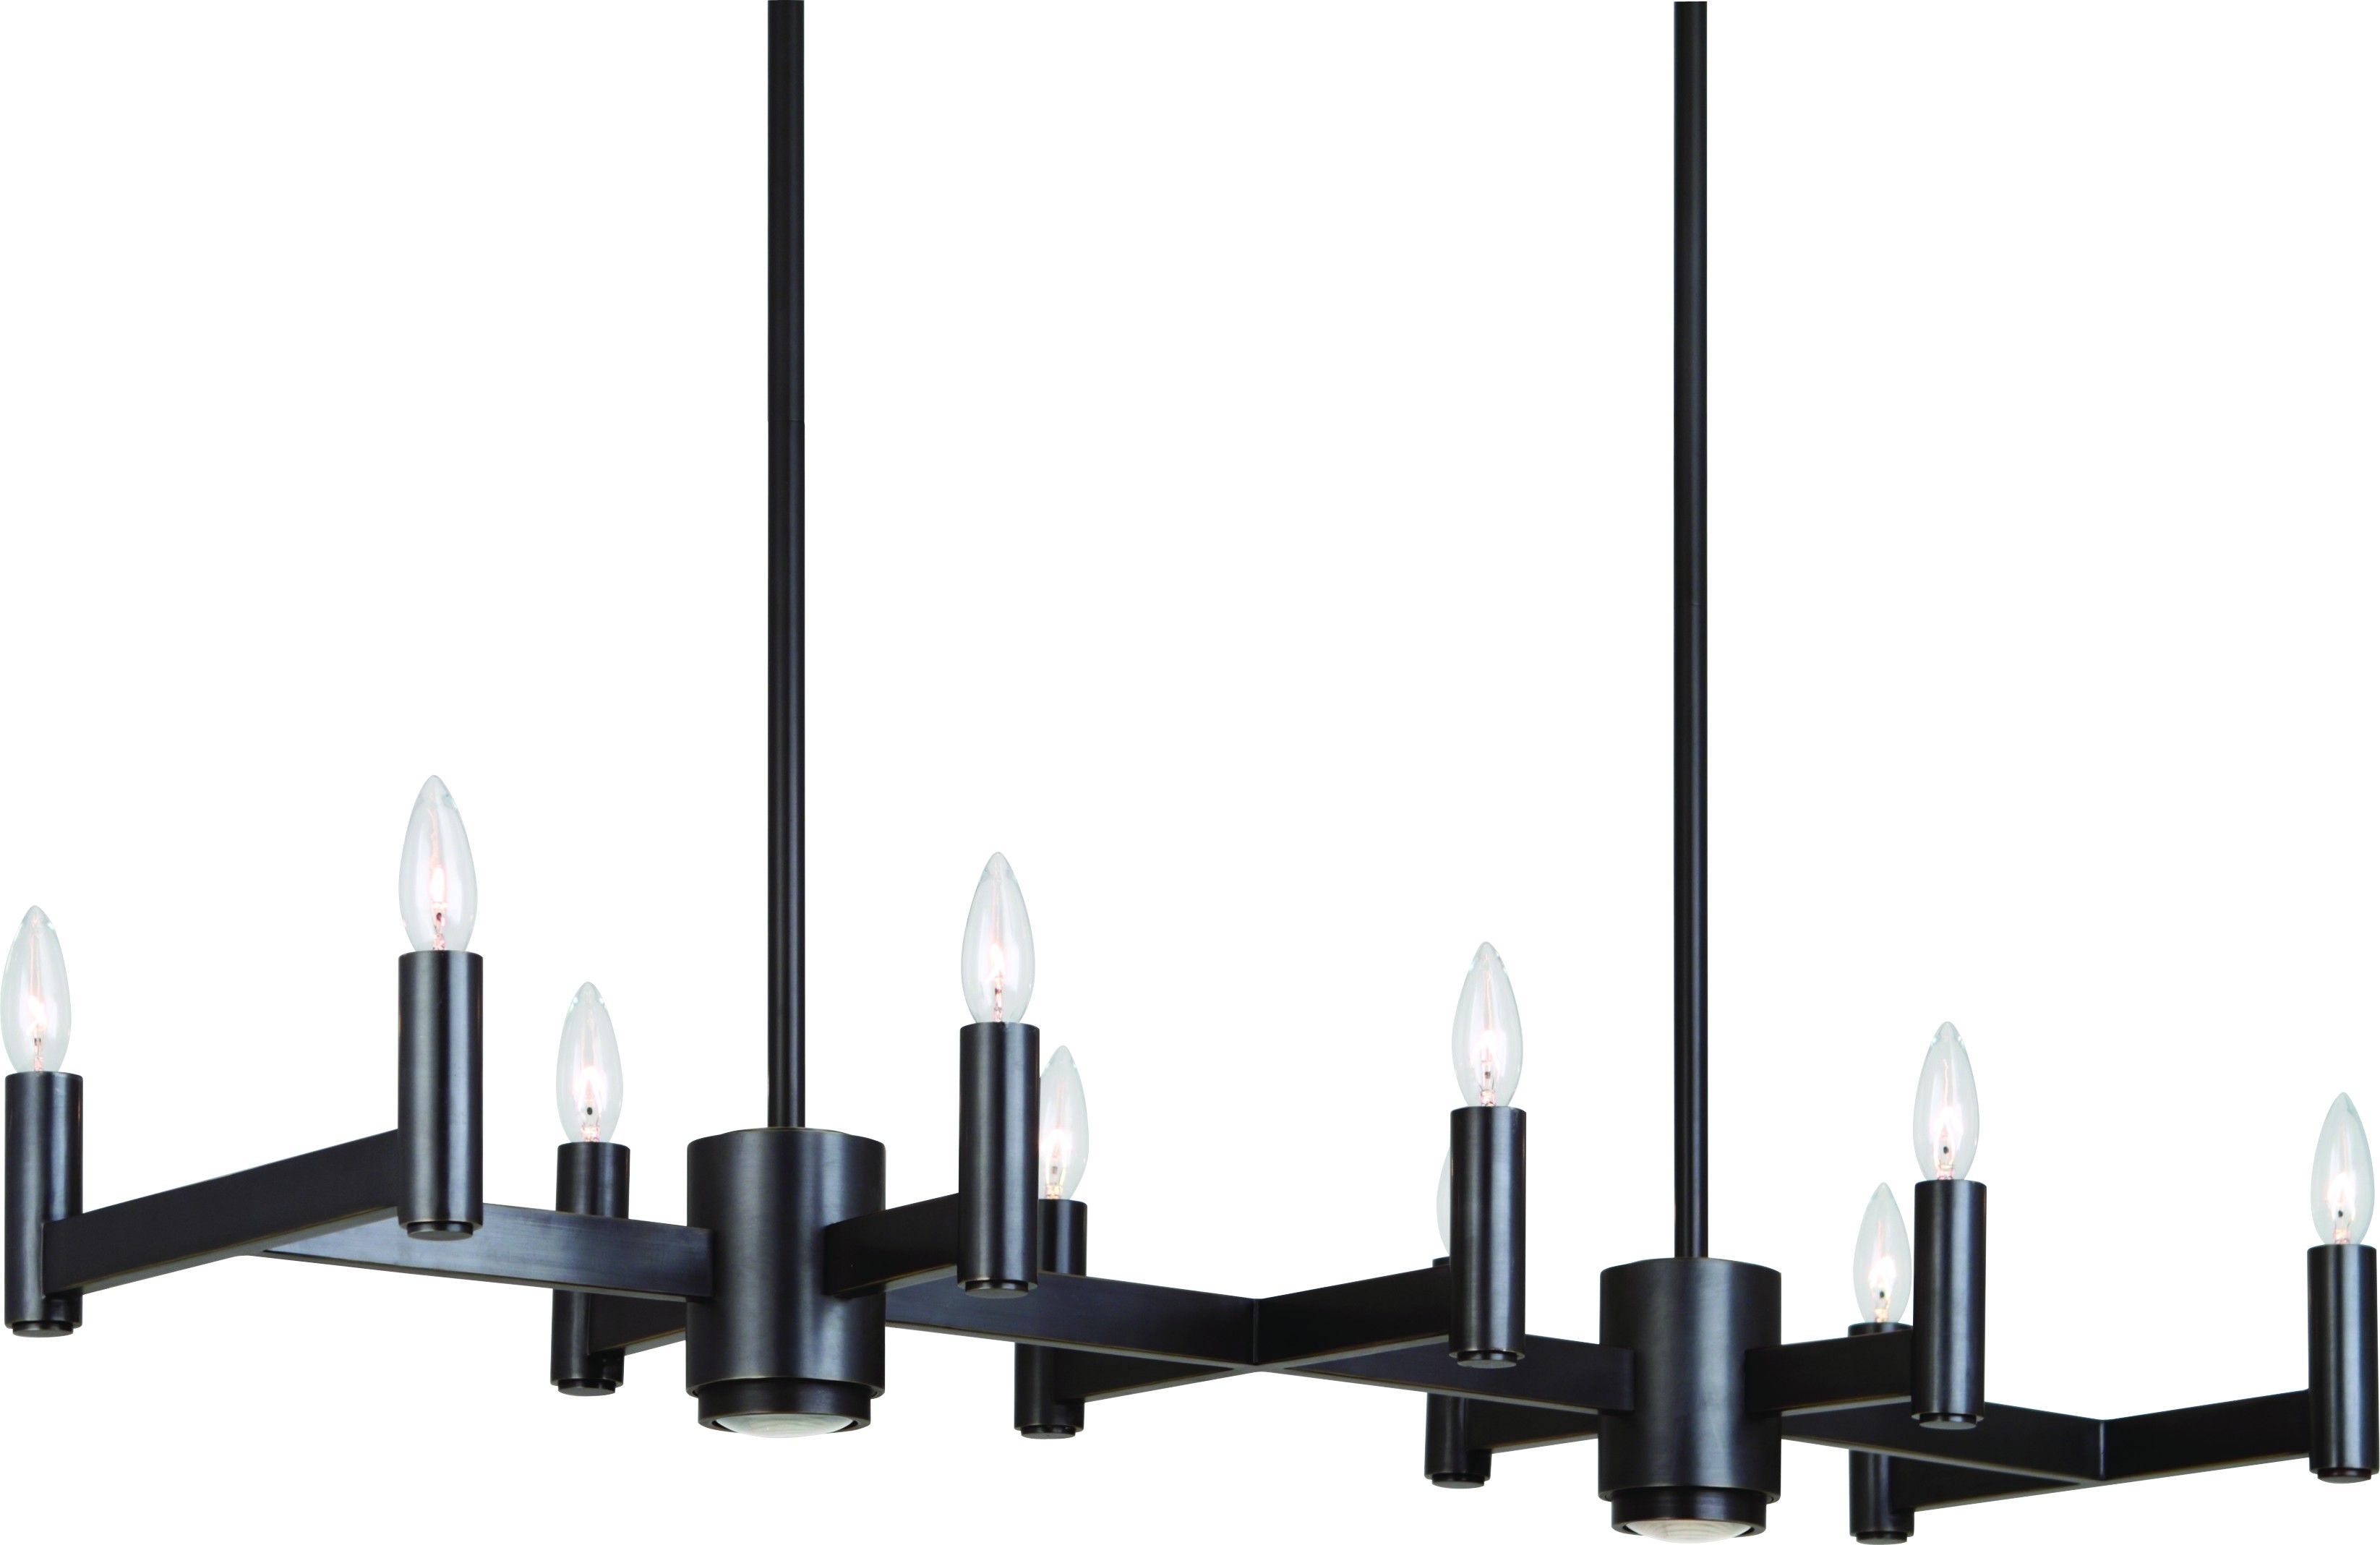 Furniture Hanging Rectangular Modern Black Wrought Iron Chandeliers With Lamp Holder For Dining Room Lighting Ideas Iron Chandelier Small Wrought Iron Pertaining To Modern Black Chandelier (Photo 5 of 12)